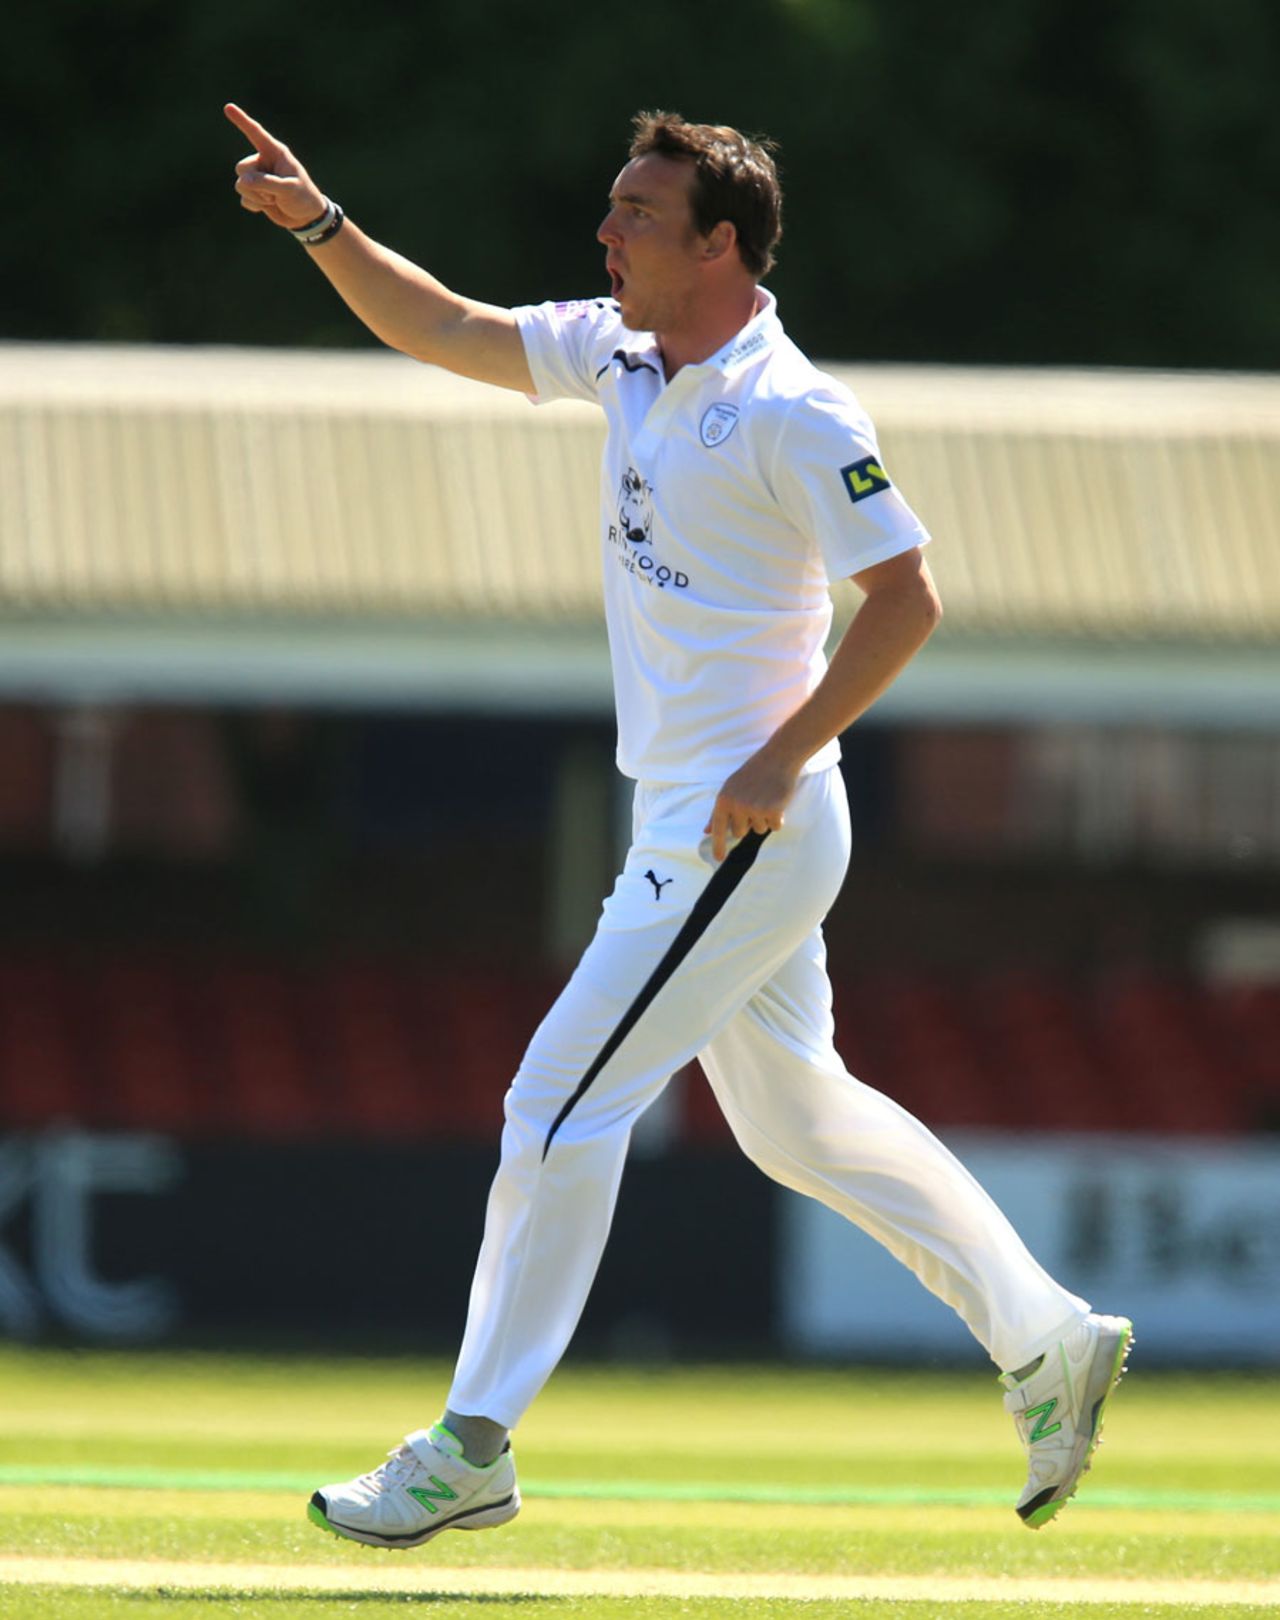 Kyle Abbott helped skittle Leicestershire, Leicestershire v Hampshire, County Championship Division T20, Grace Road, 4th day, May 21, 2014